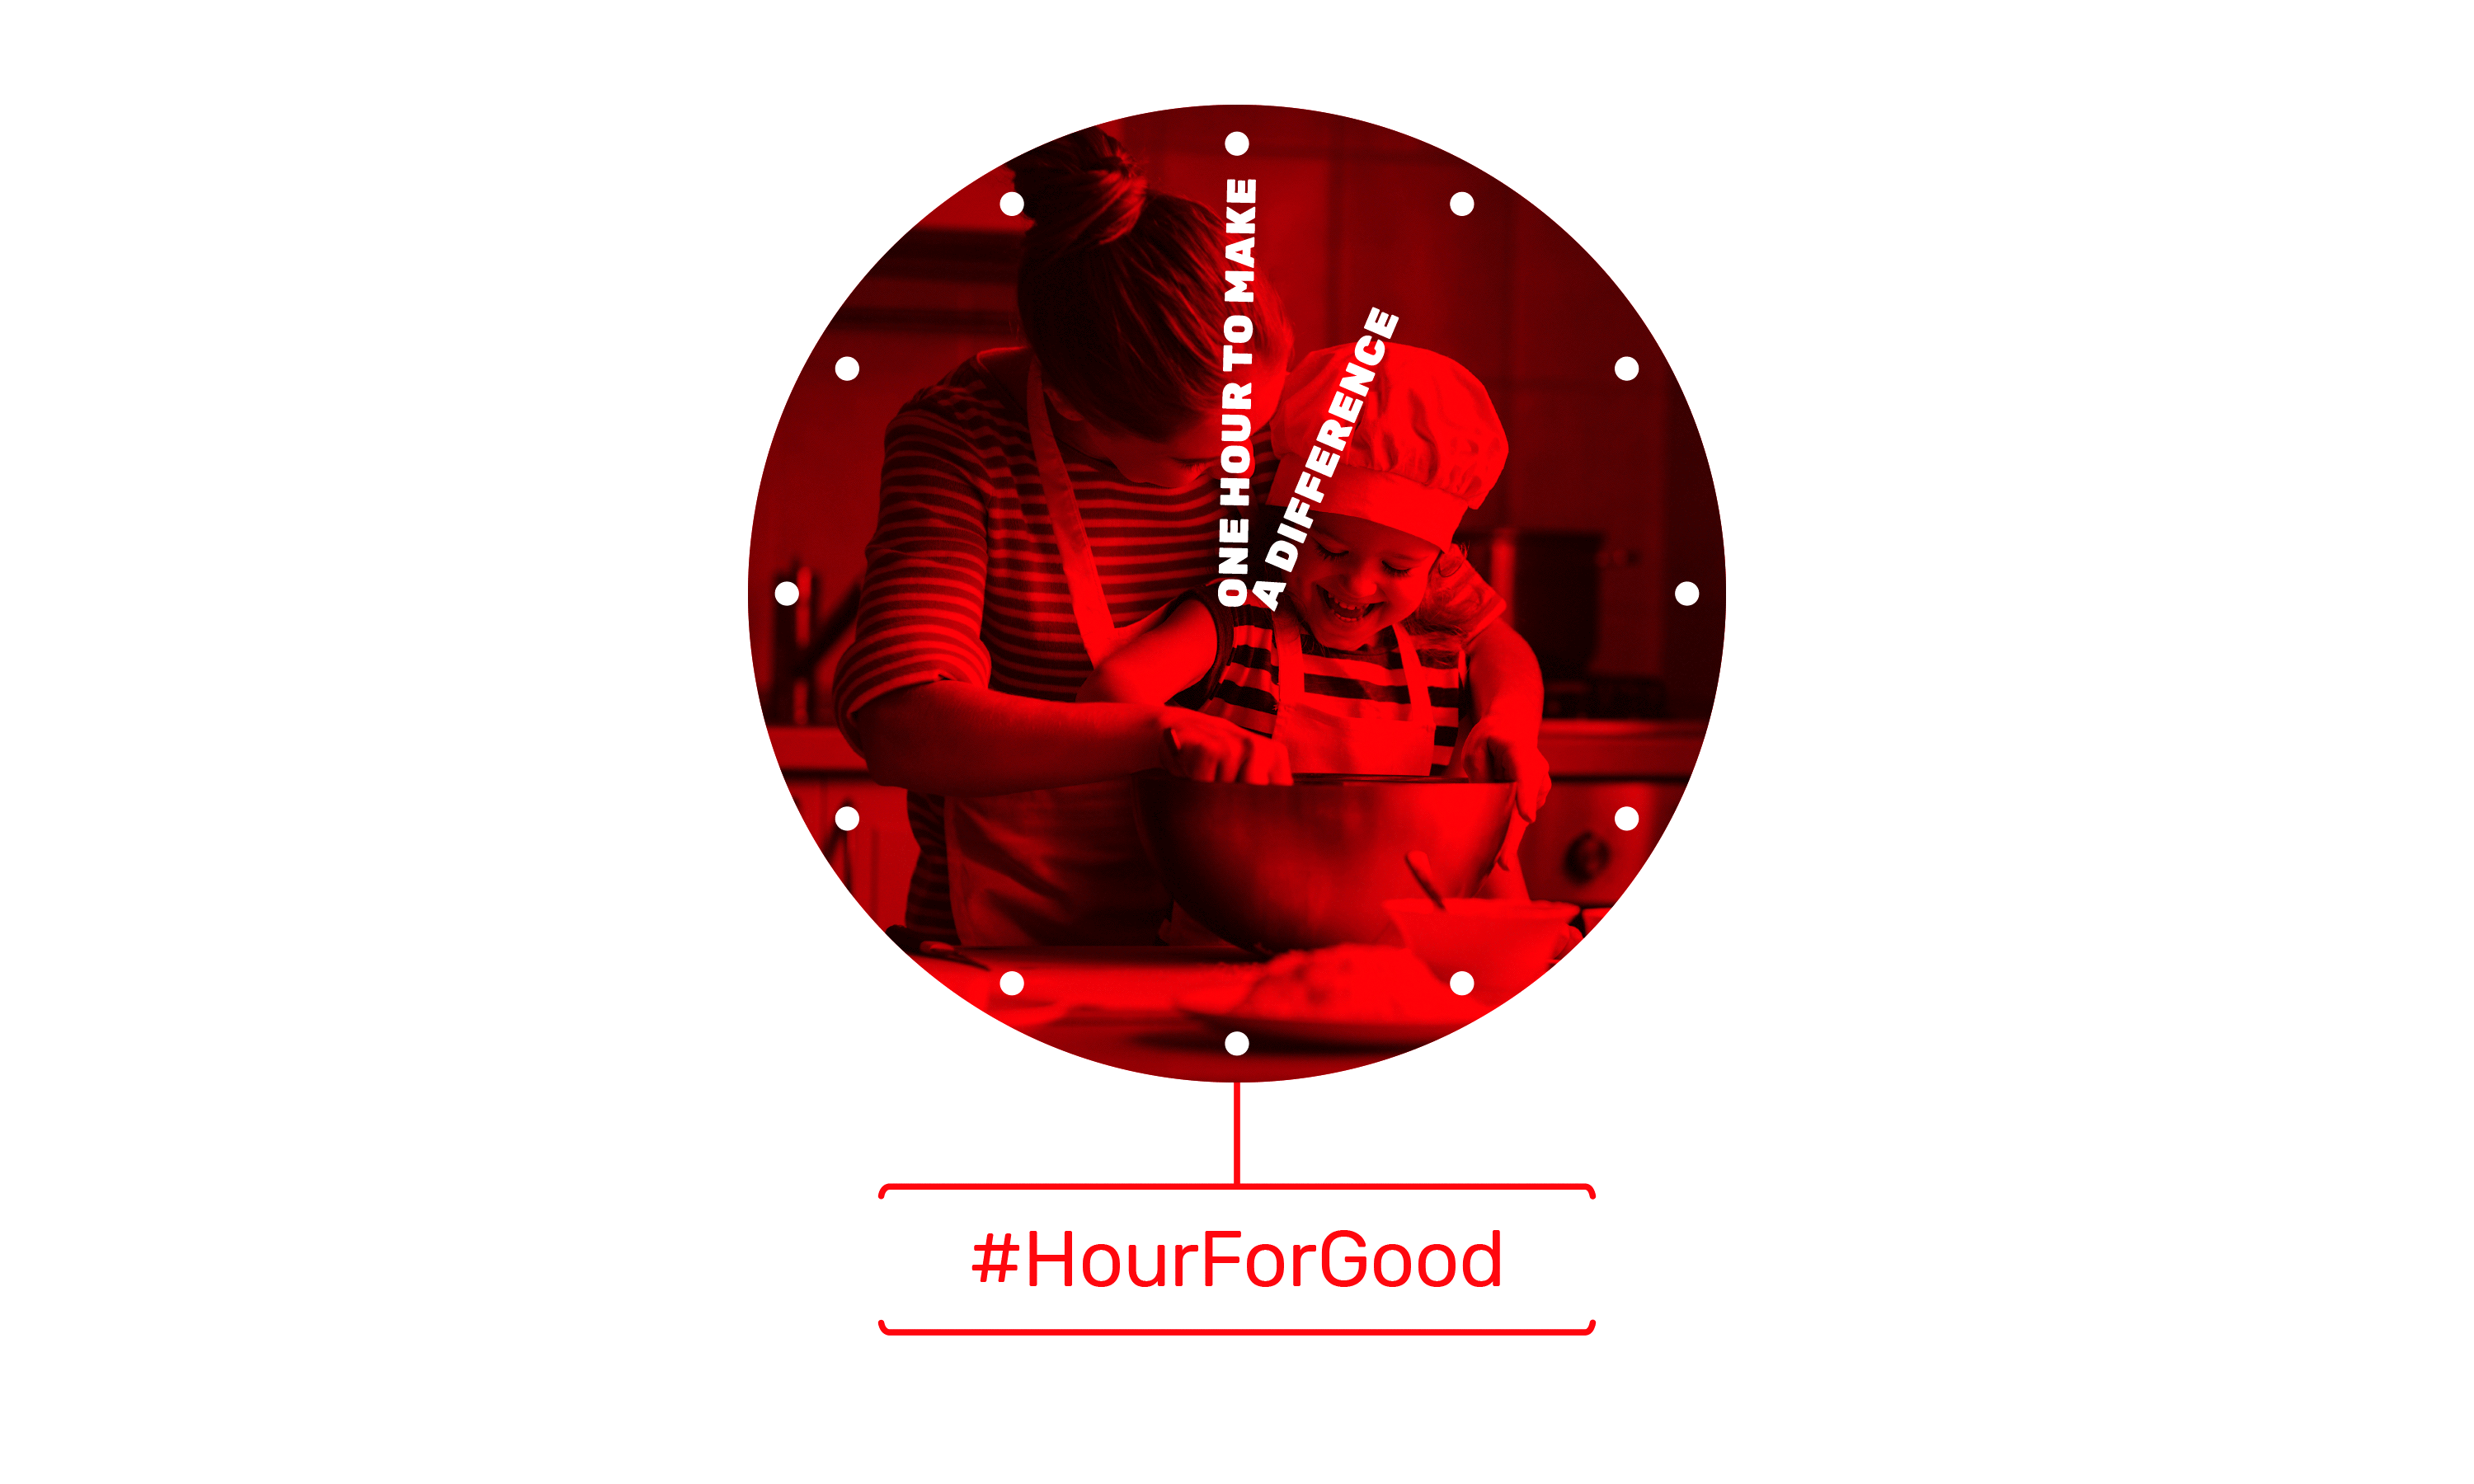 Brand campaign by Neon - designed by Dana Robertson - Charity sector branding - Action for children - An hour for good graphic cooking together